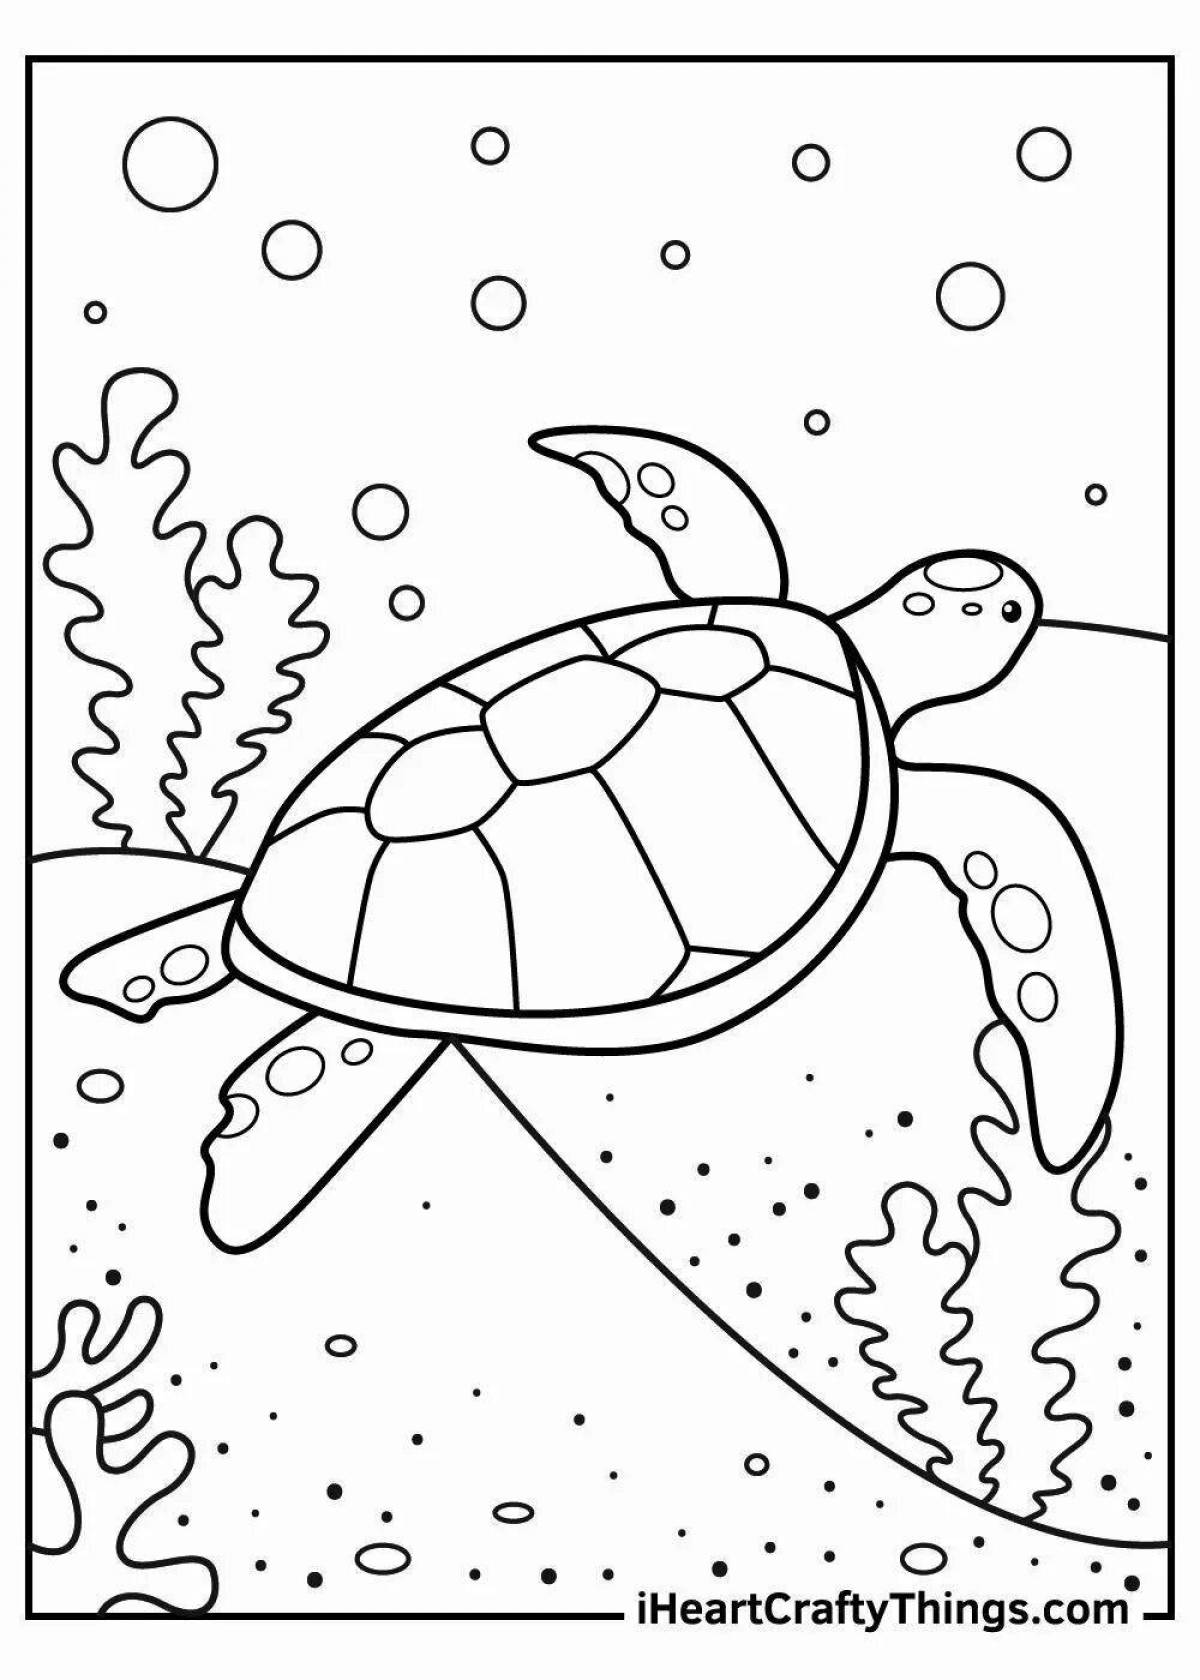 Amazing sea turtle coloring page